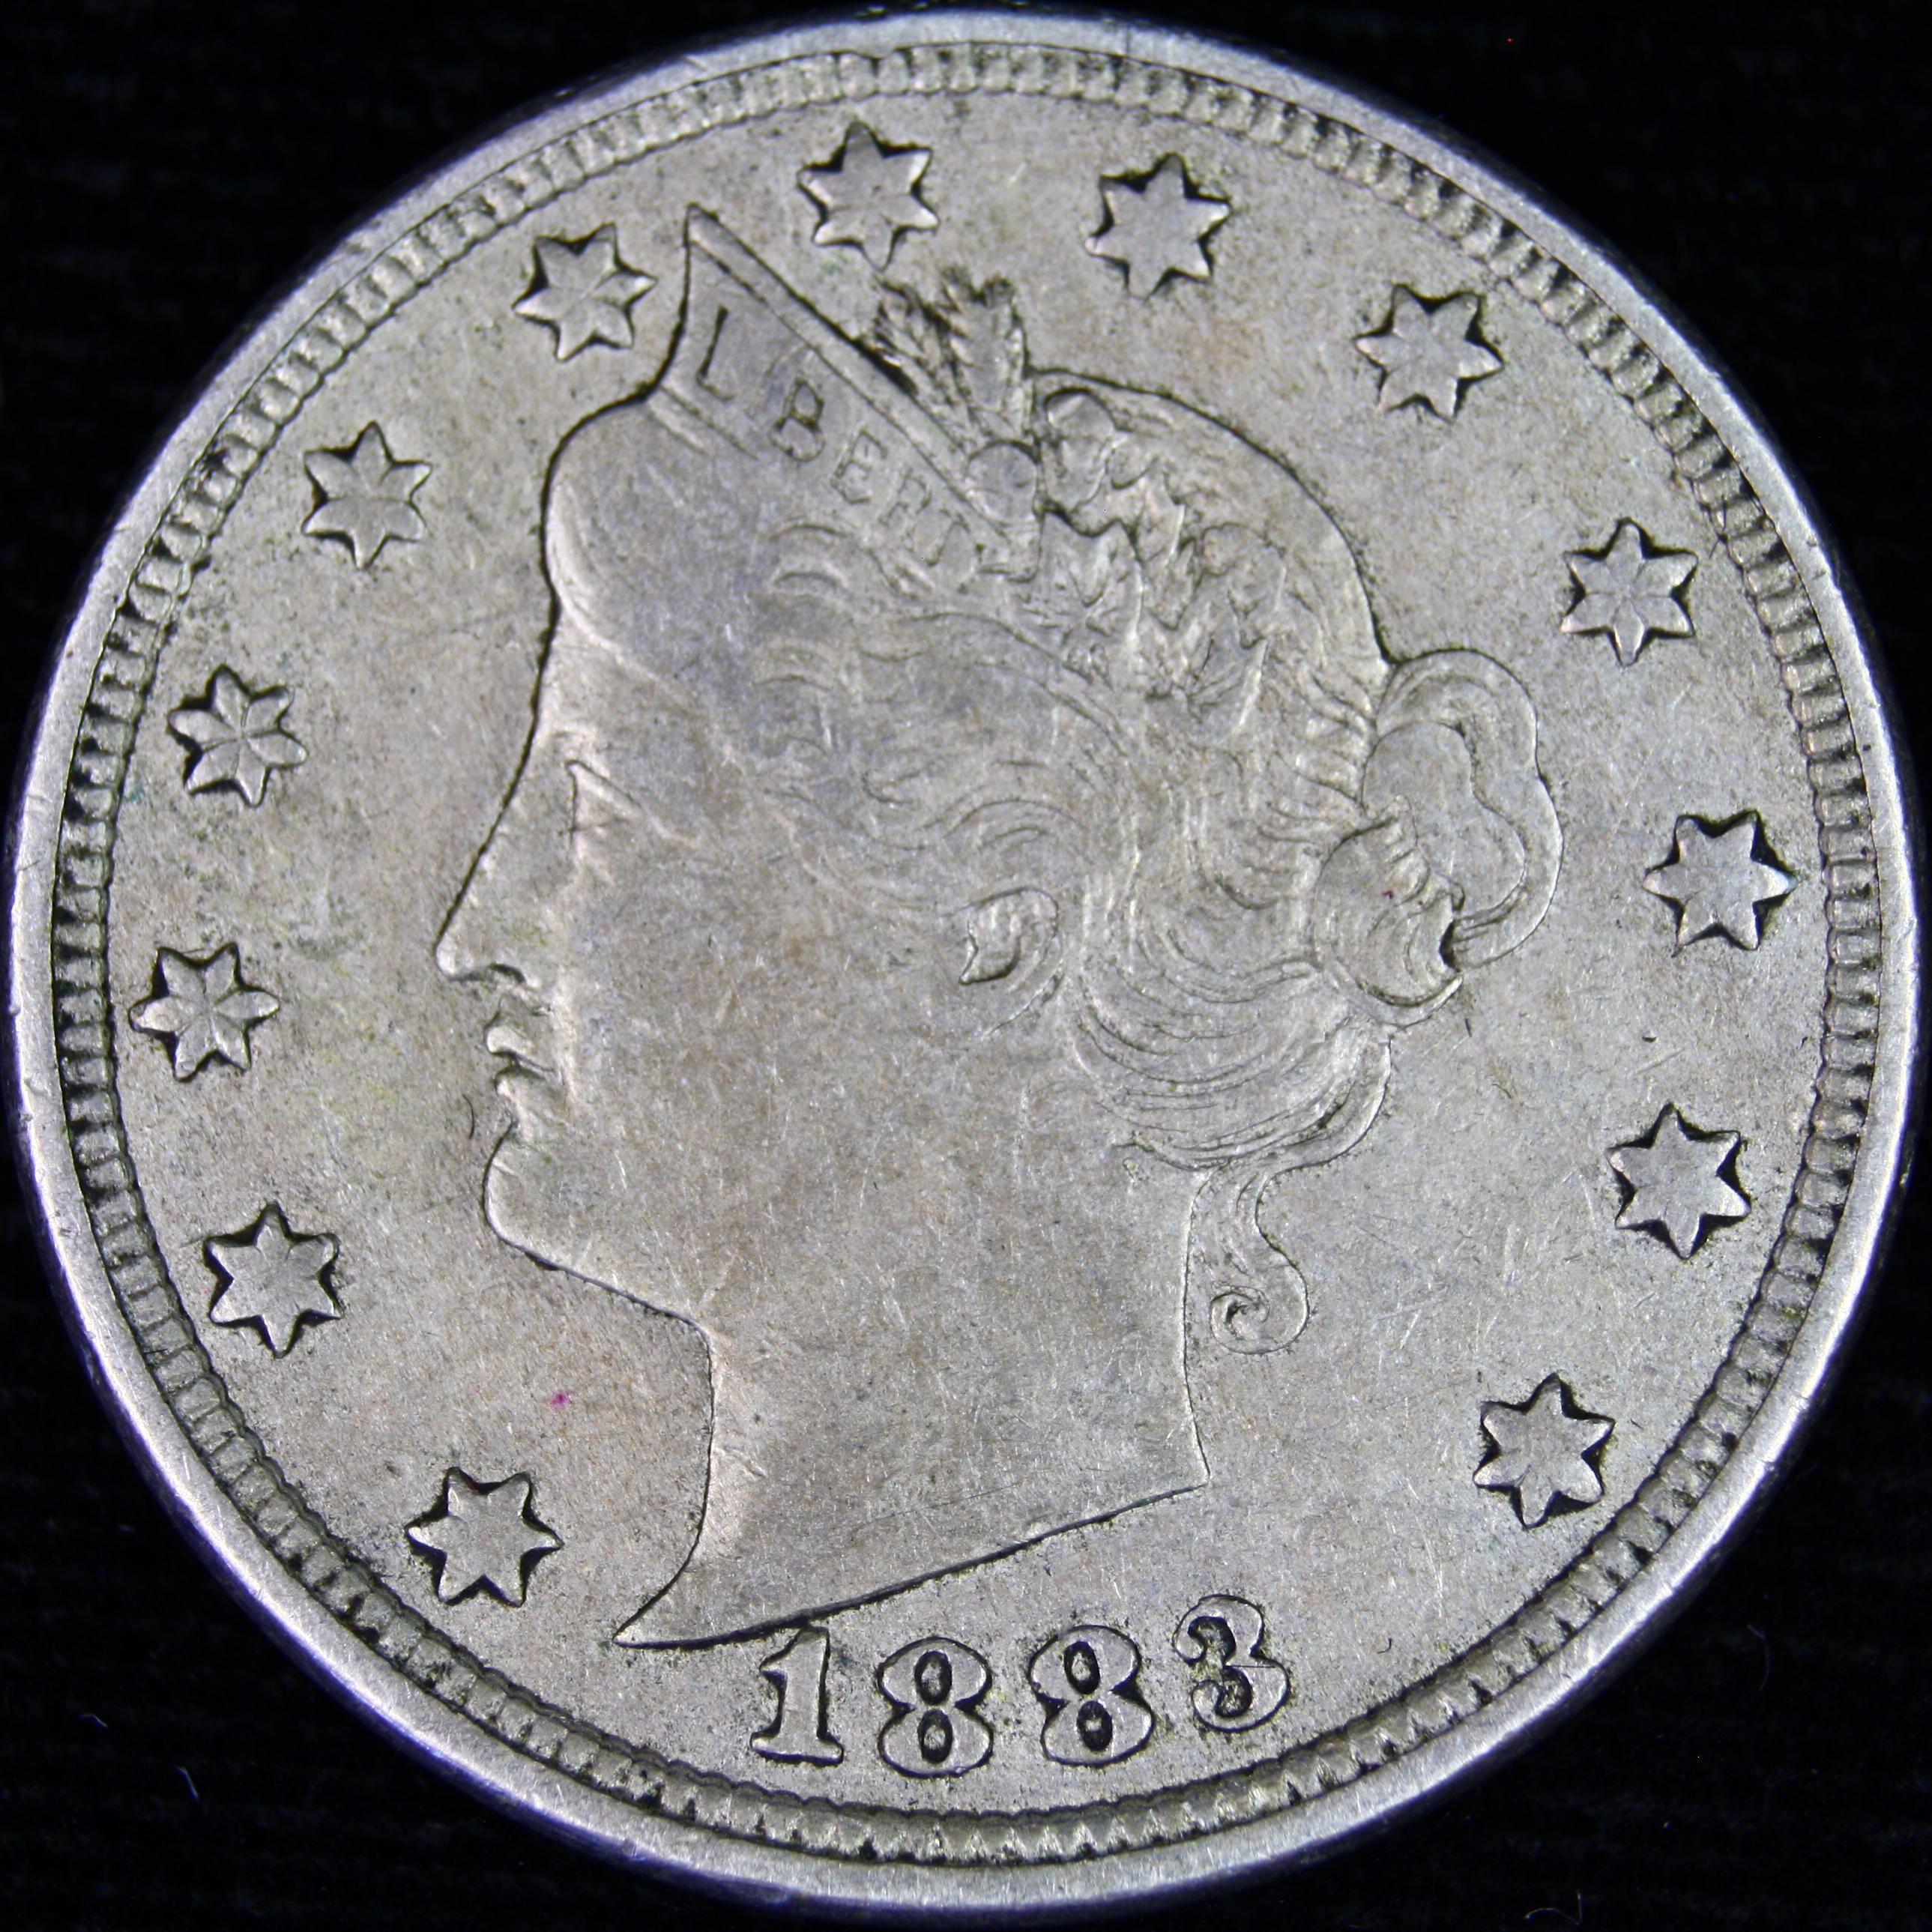 1883 with cents U.S. "V" nickel